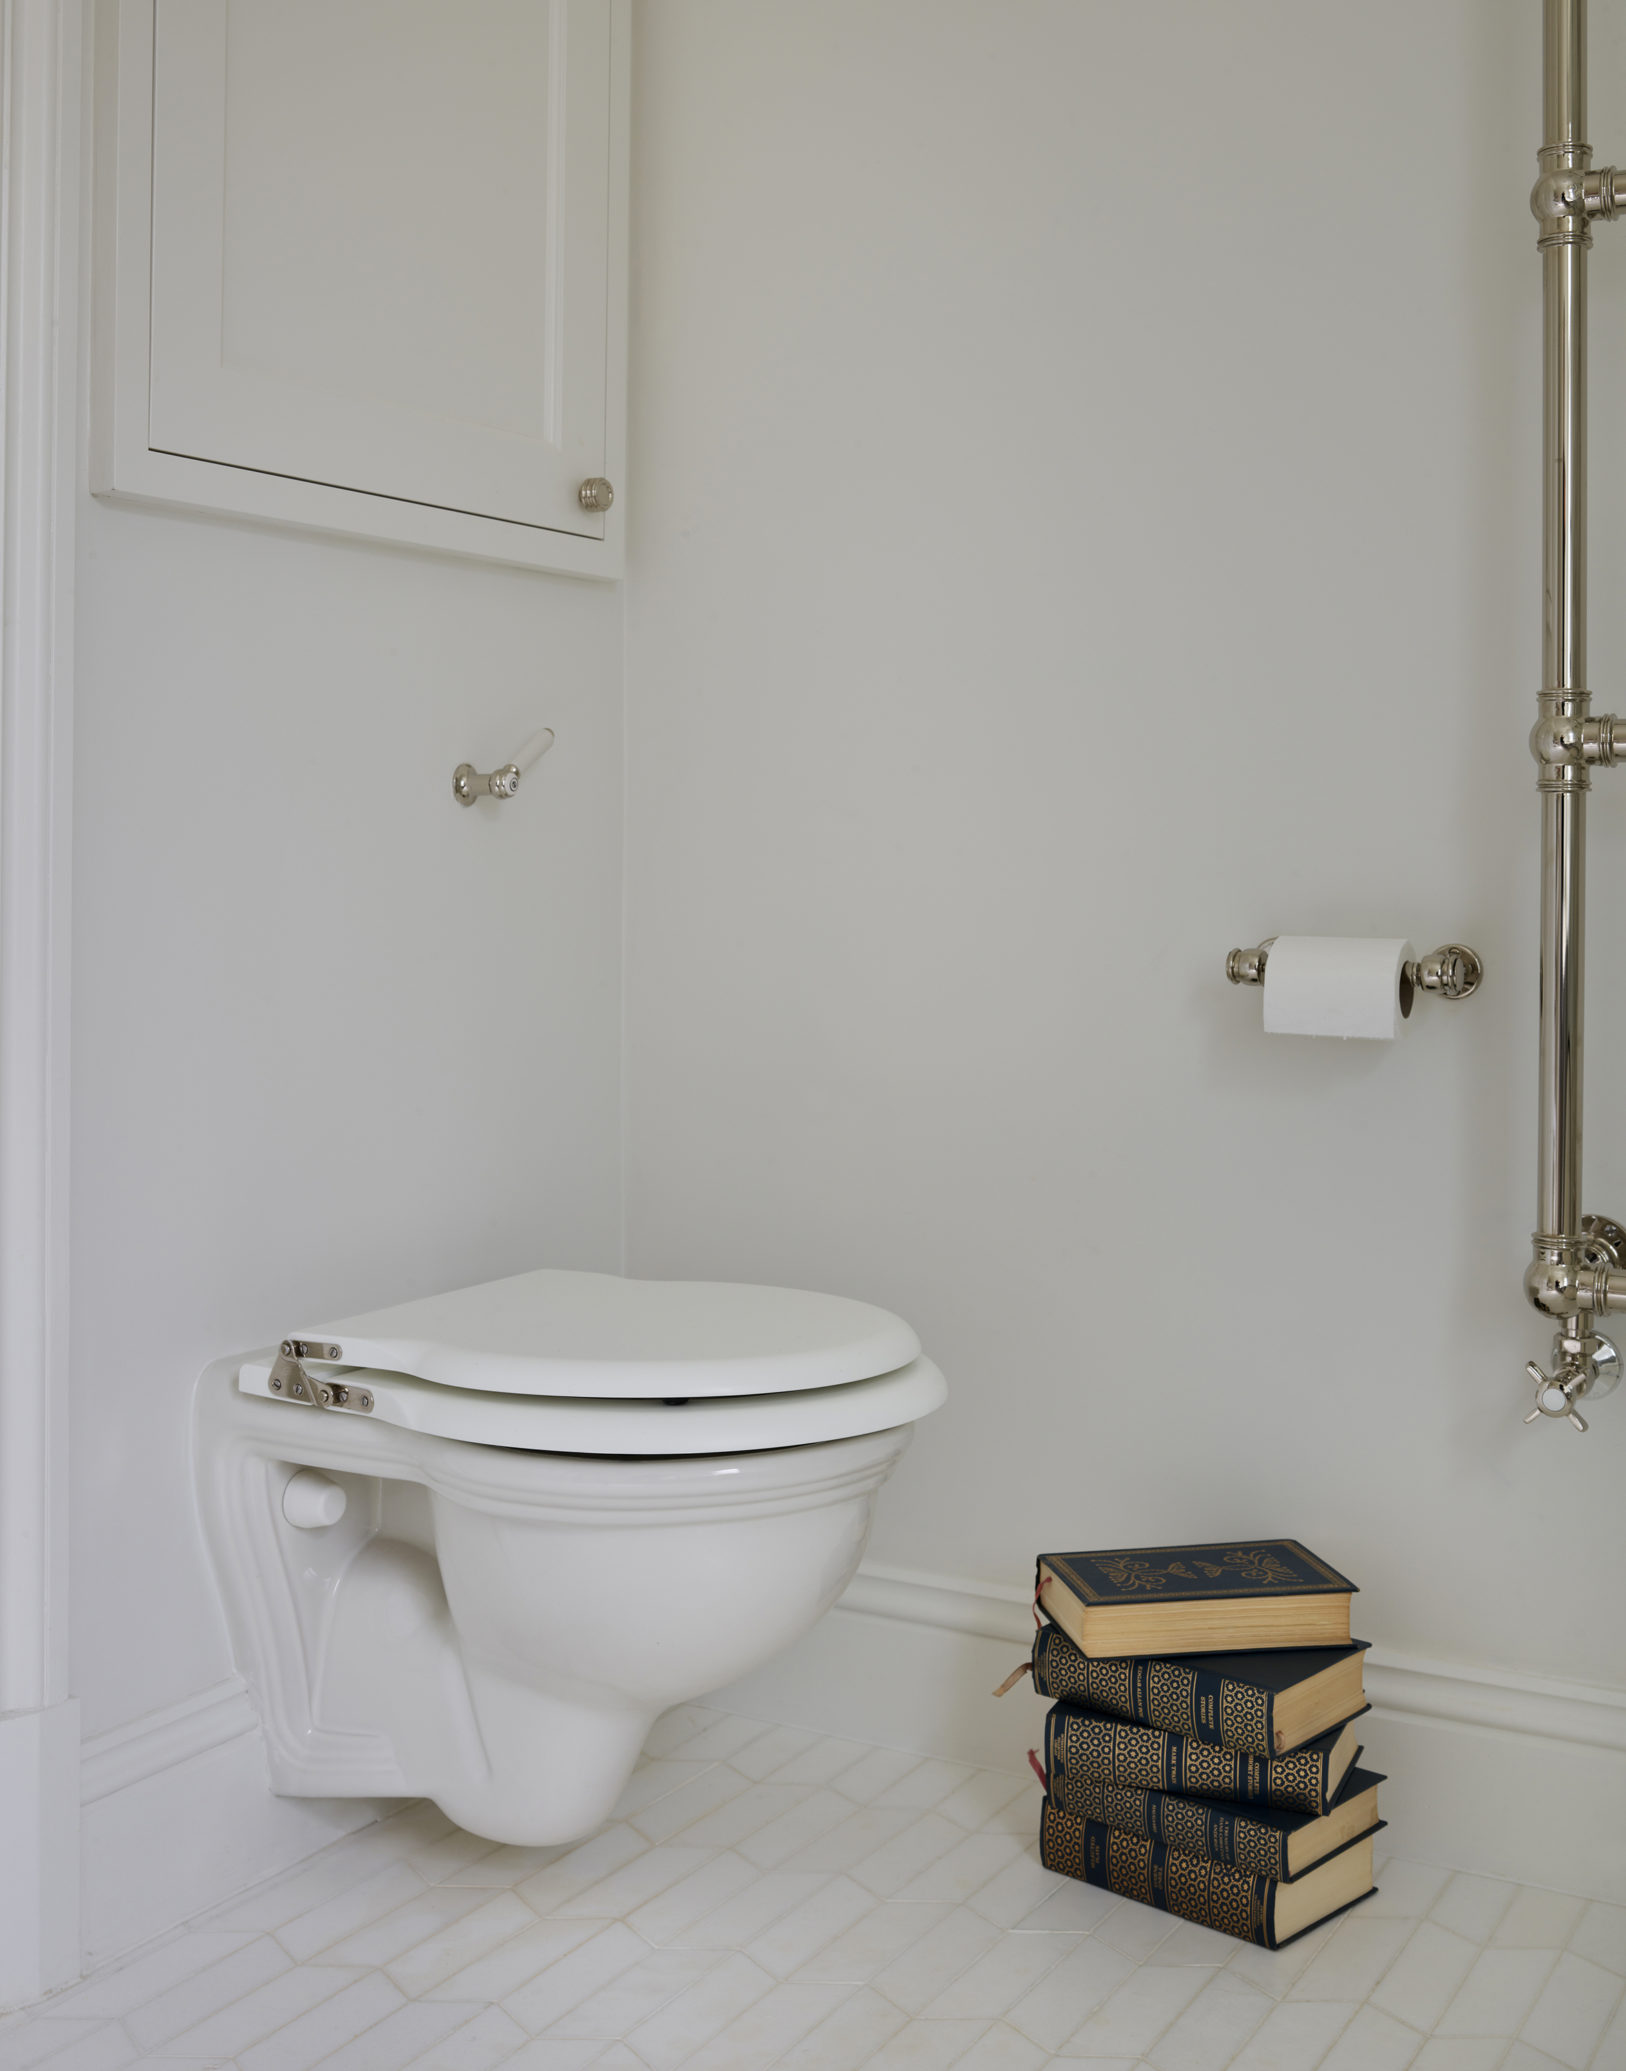 The Rother Wall Mounted WC Suite - Drummonds Bathrooms